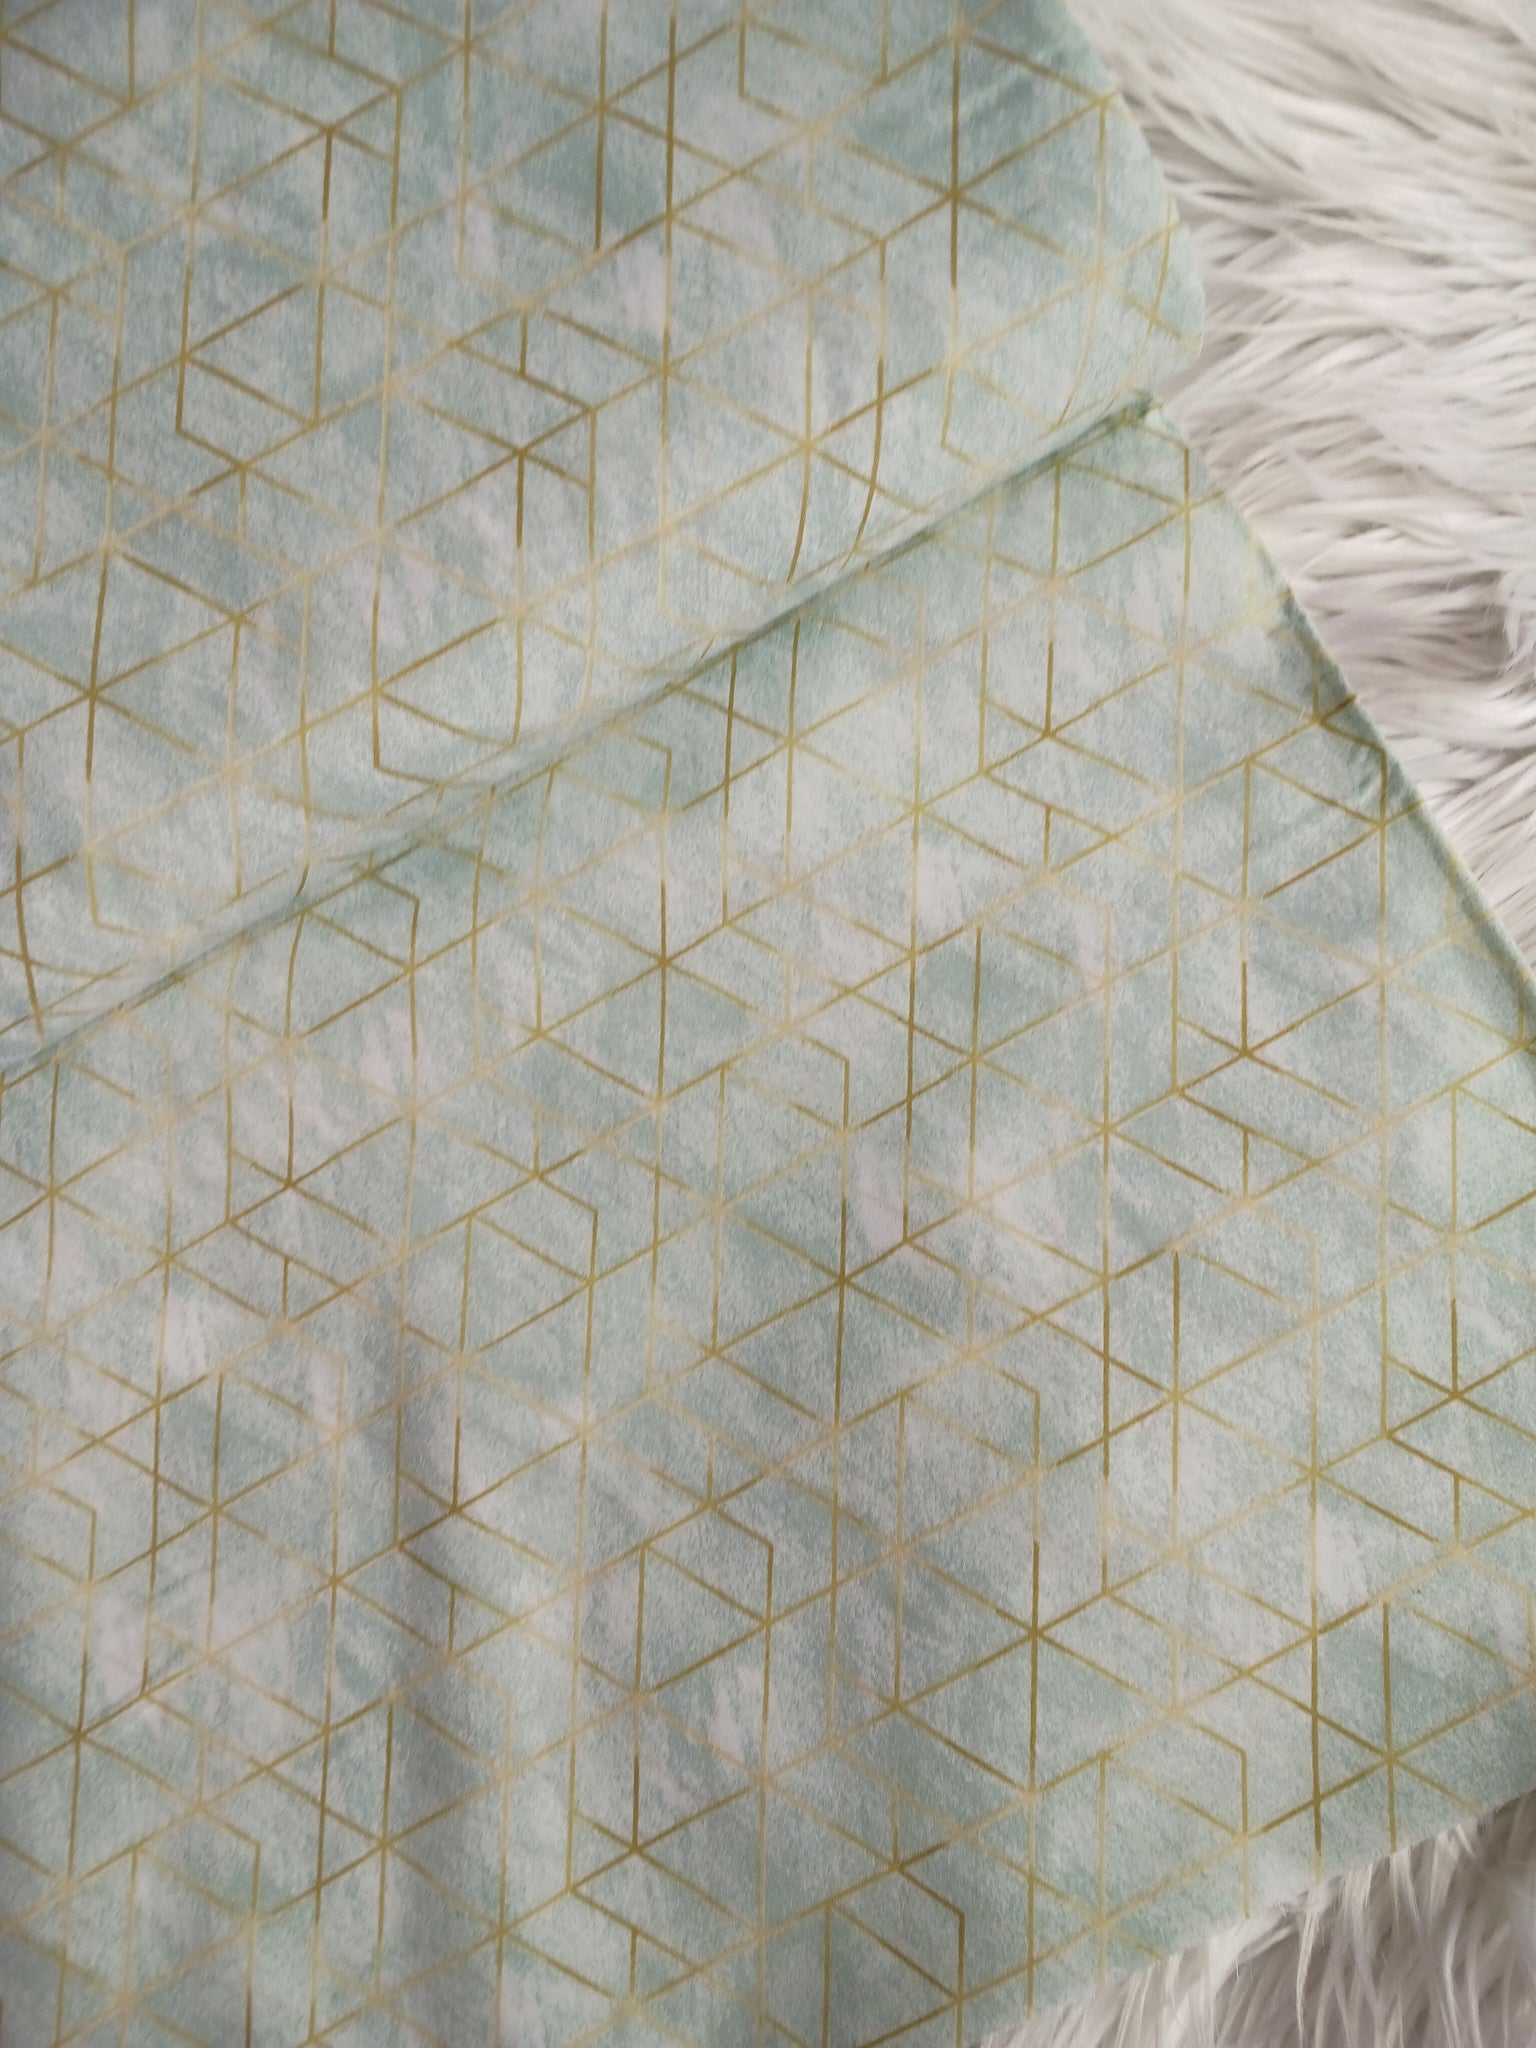 Gold Geometric on Marbled Sagel Poly Cotton| By the Half Yard